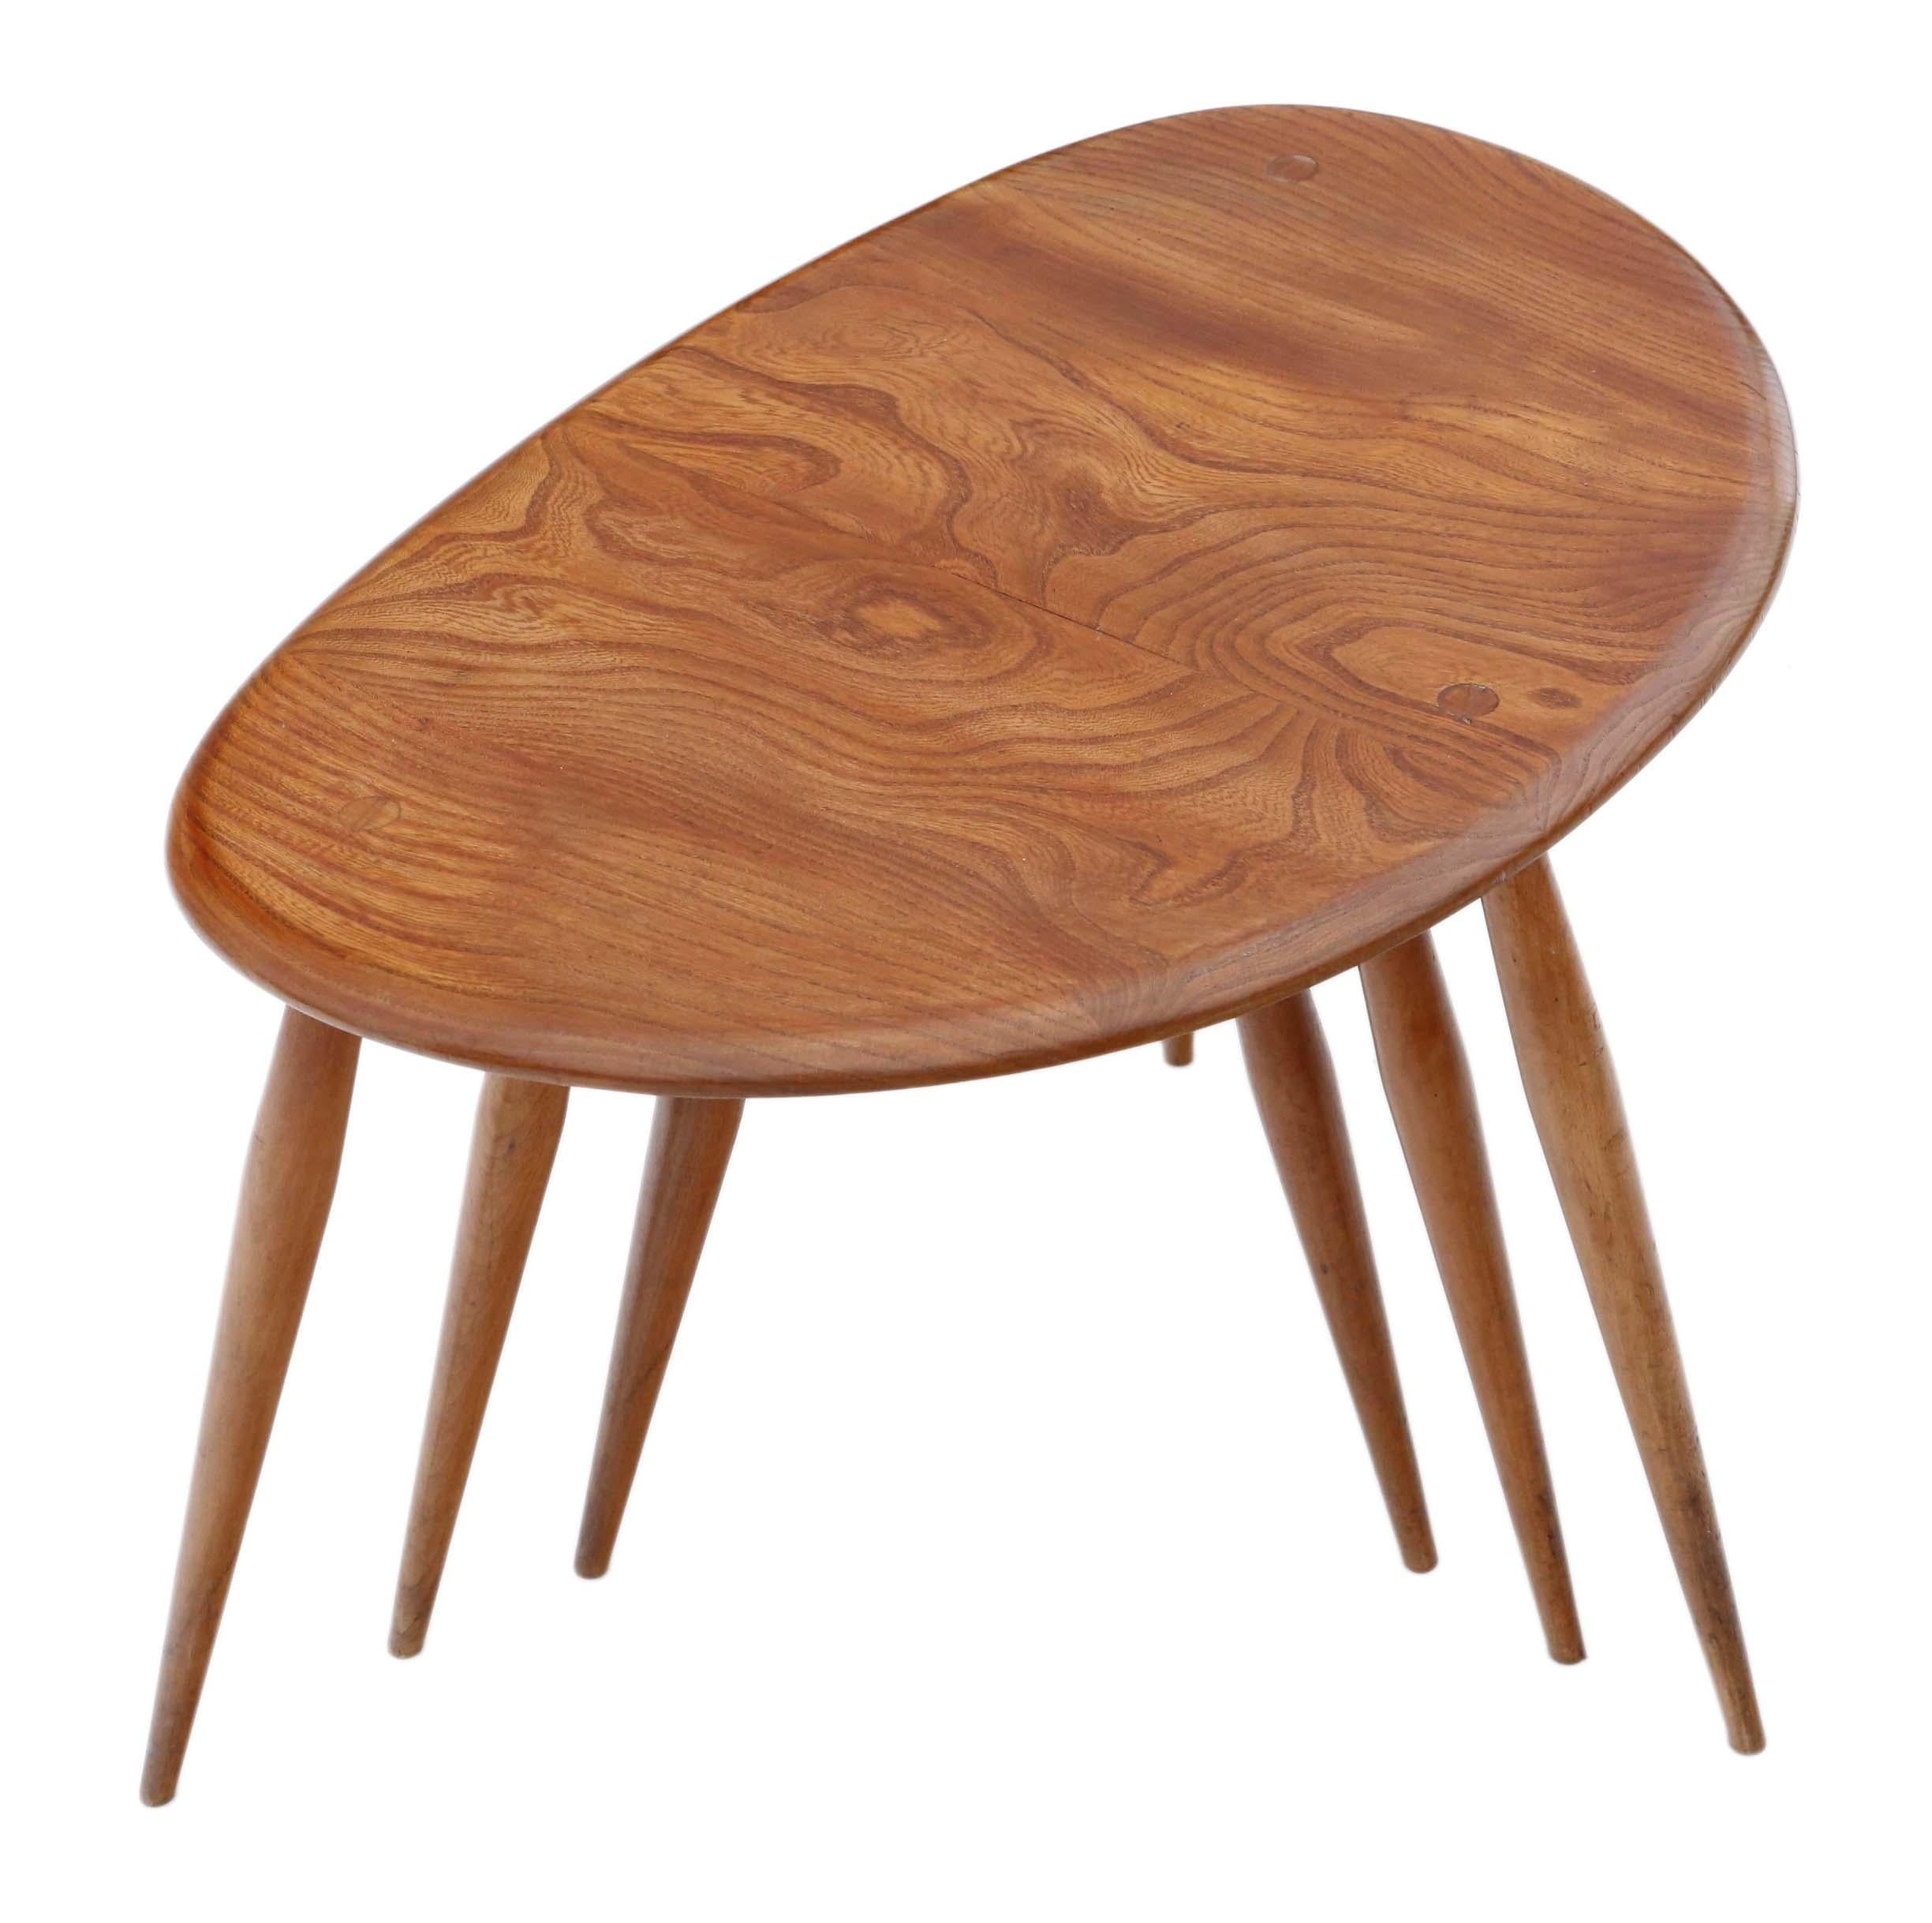 Antique retro quality Ercol nest of 3 tables C1970s, great design and shape, very sought after. Elm and beech construction.
 
Very attractive, with striking proportions and styling. 
 
No loose joints or woodworm.
Good age, colour and